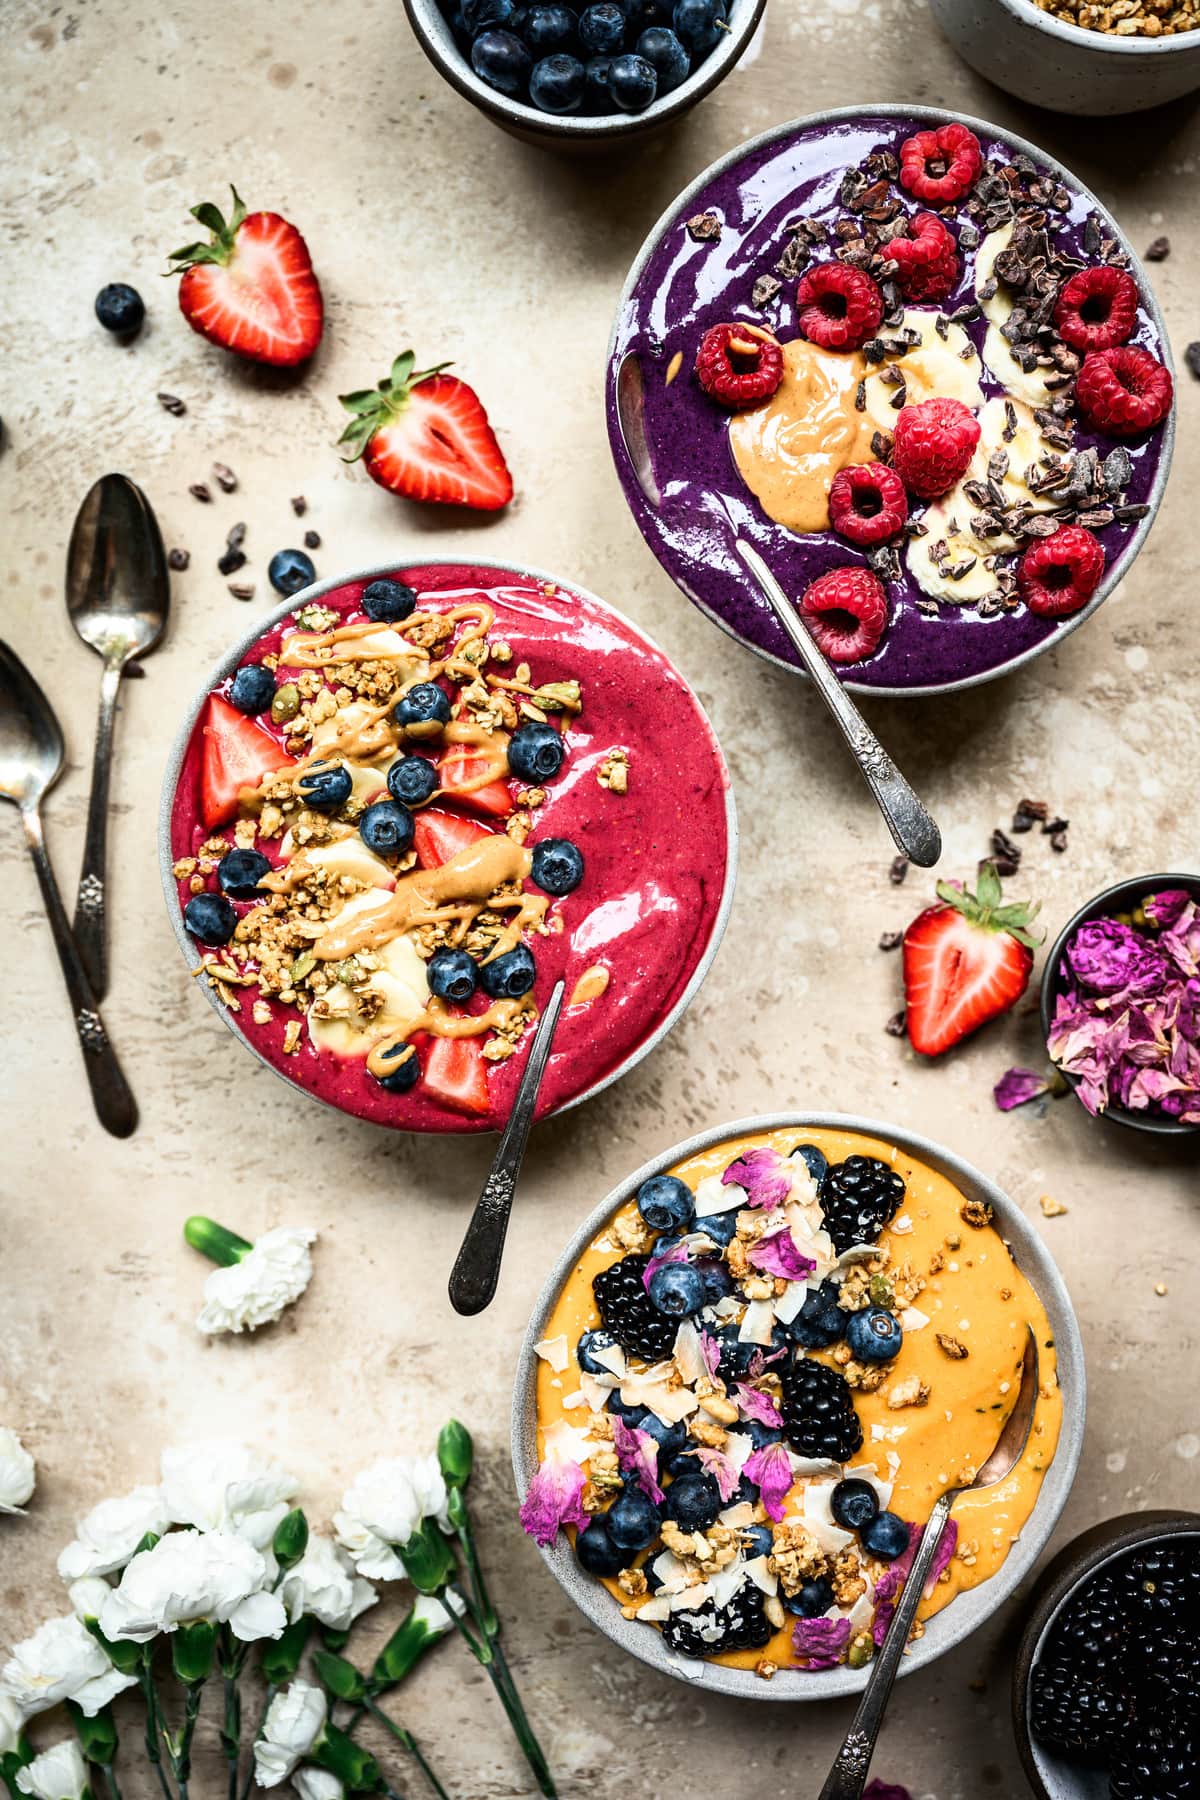 Overhead view of 3 beautiful red, purple and yellow summer smoothies bowls on rustic brown surface